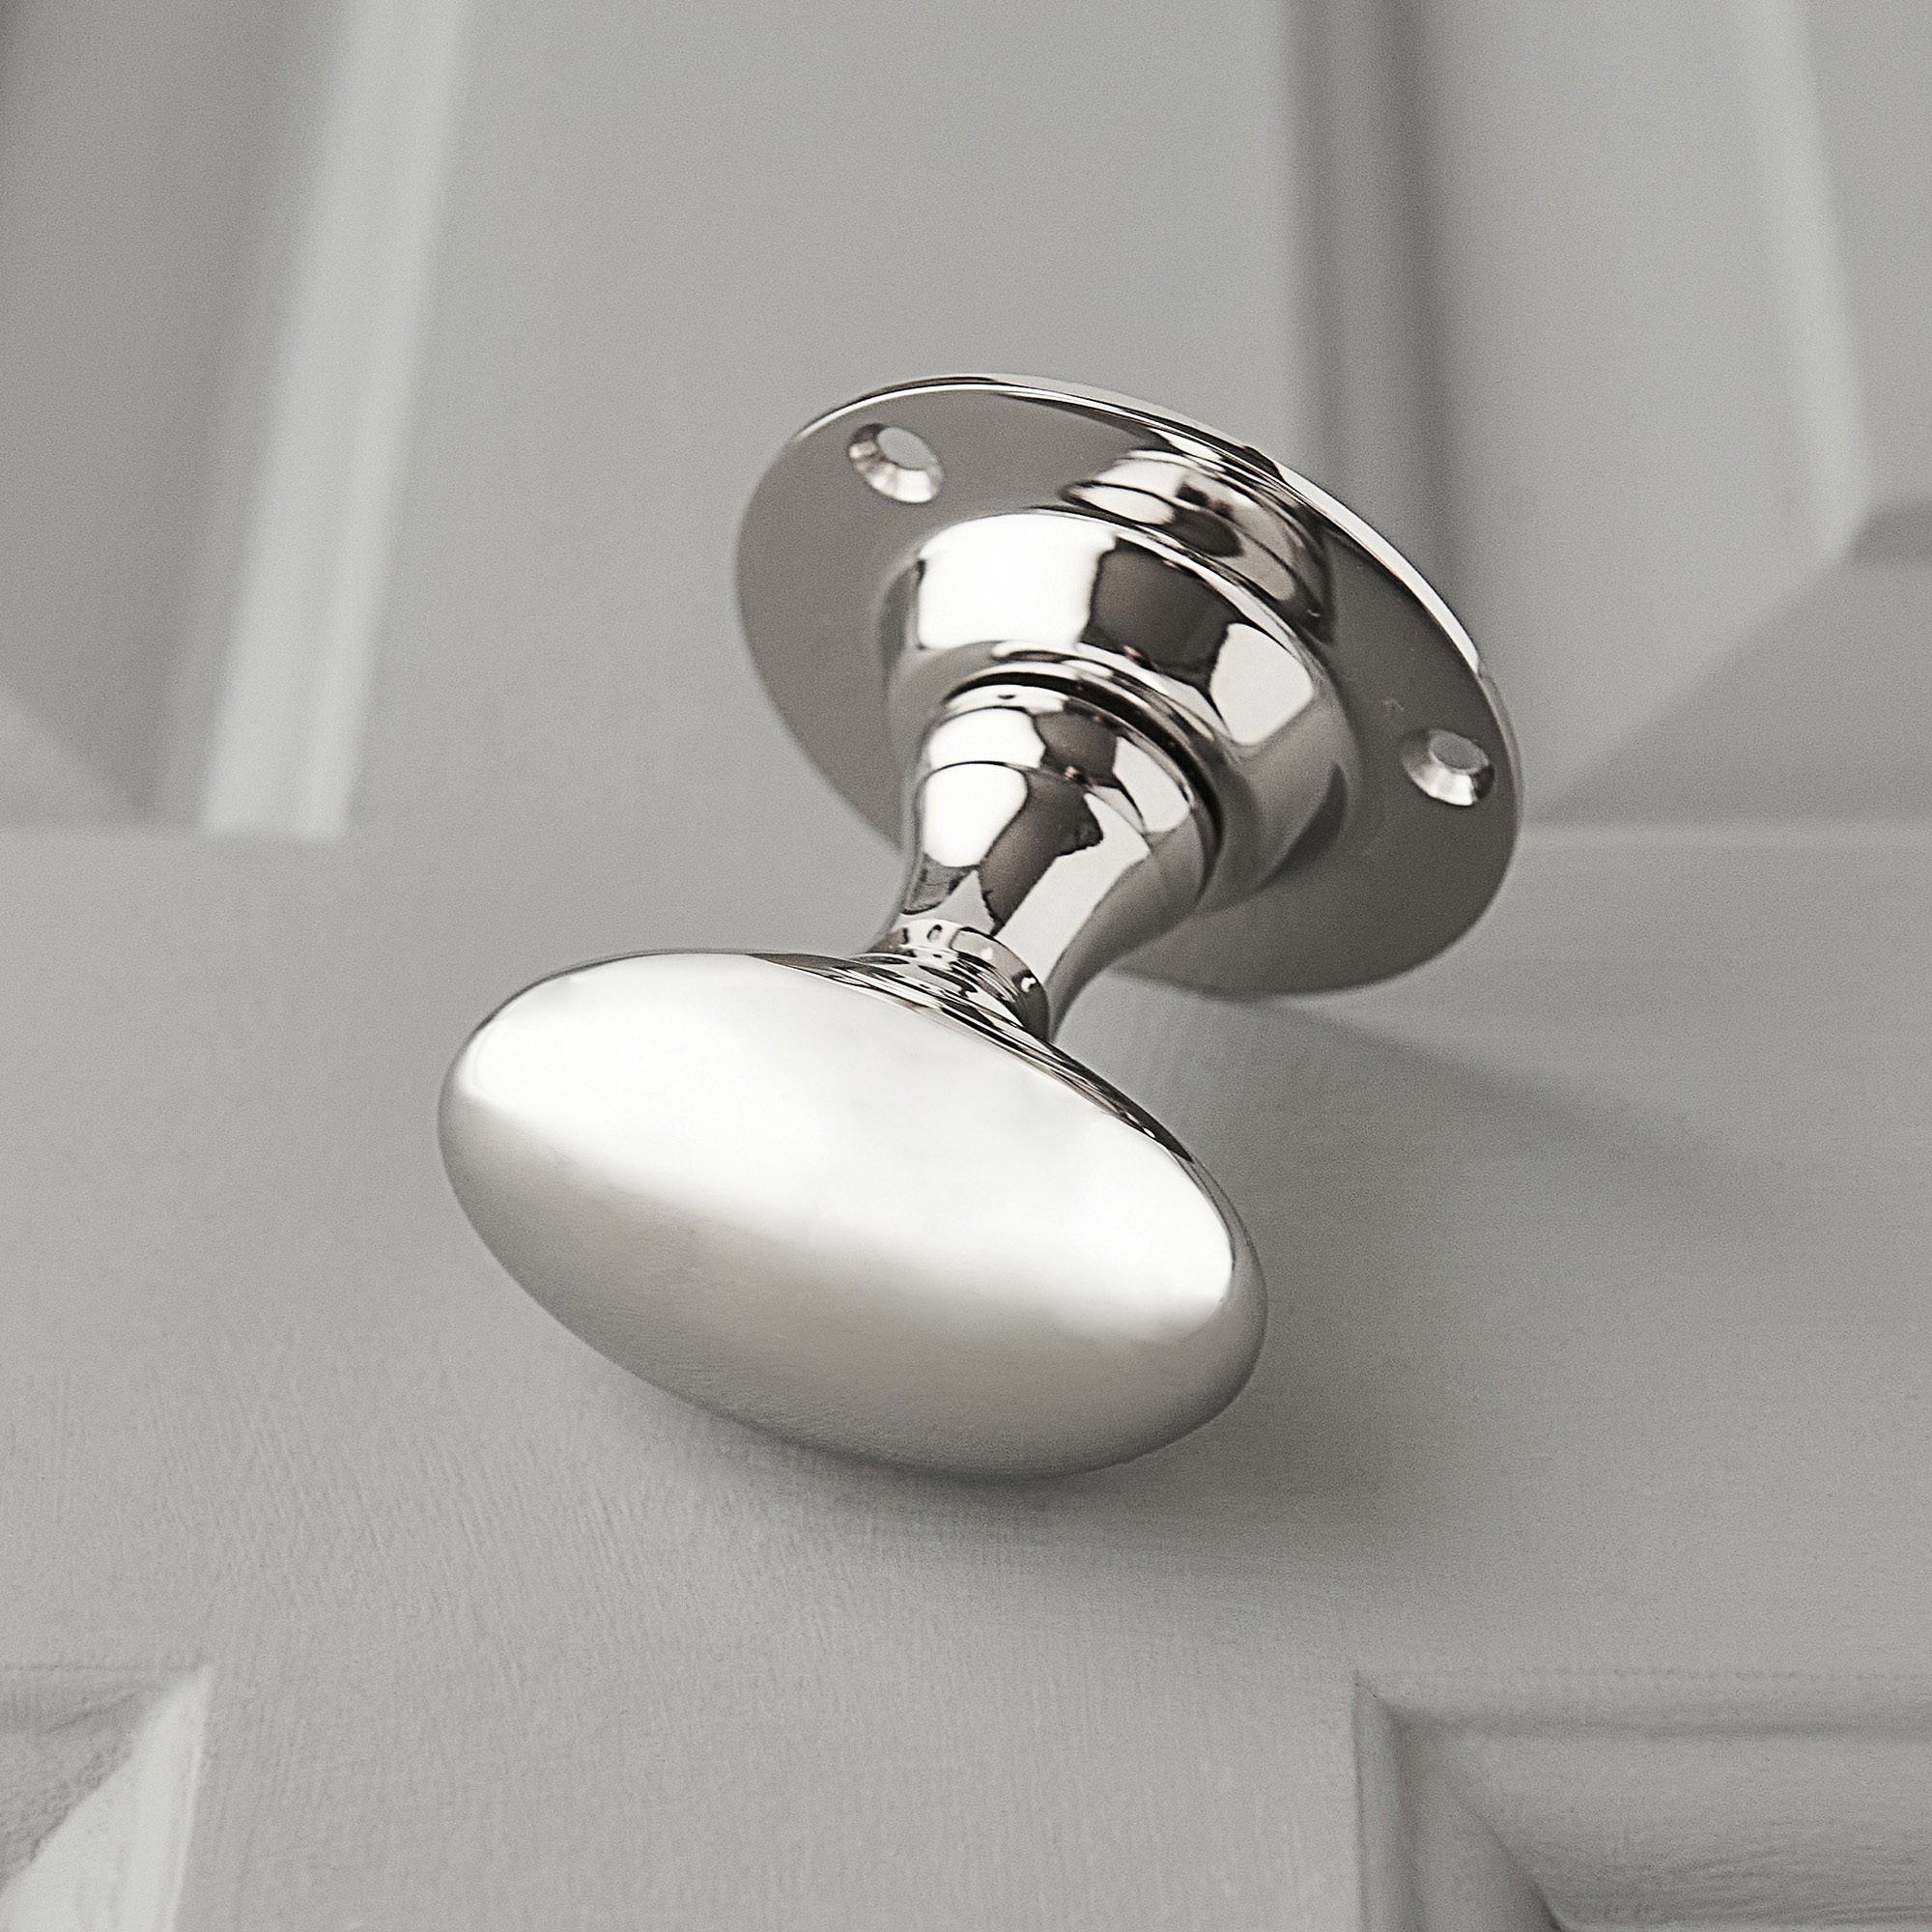 Oval and Bead Door Knob and Faceplate Hardware Set -009